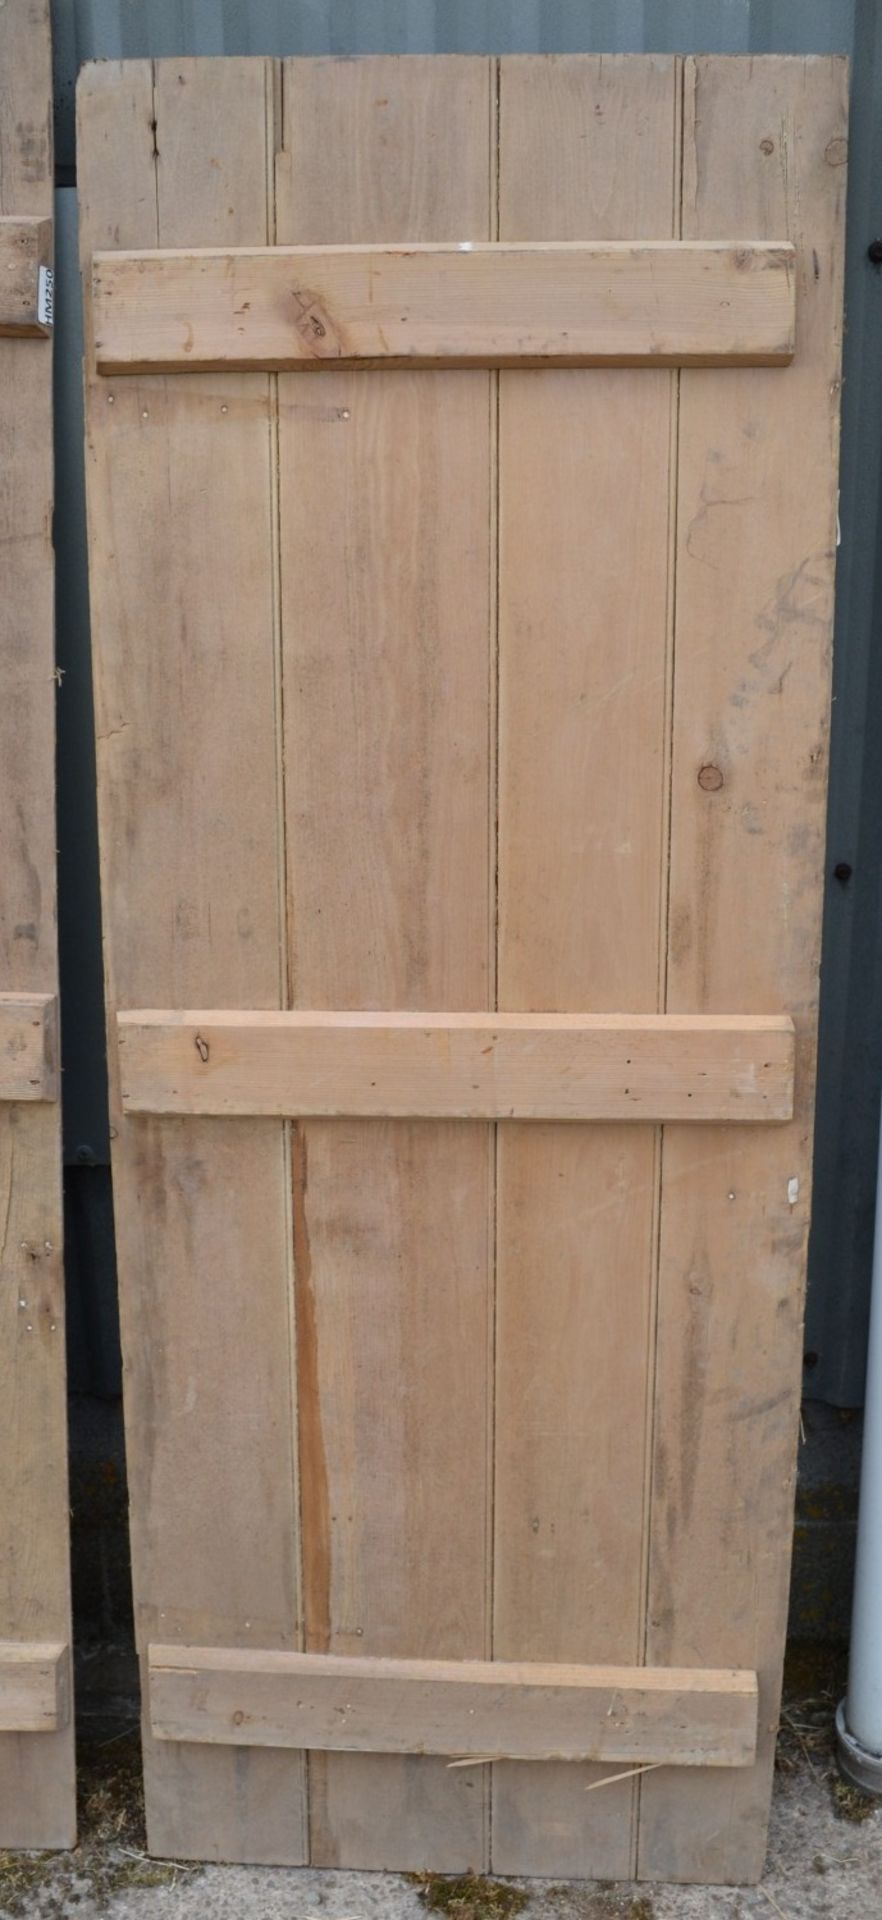 Set Of 4 x Reclaimed Unpainted Wooden Doors - Taken From A Grade II Listed Property - Image 5 of 8